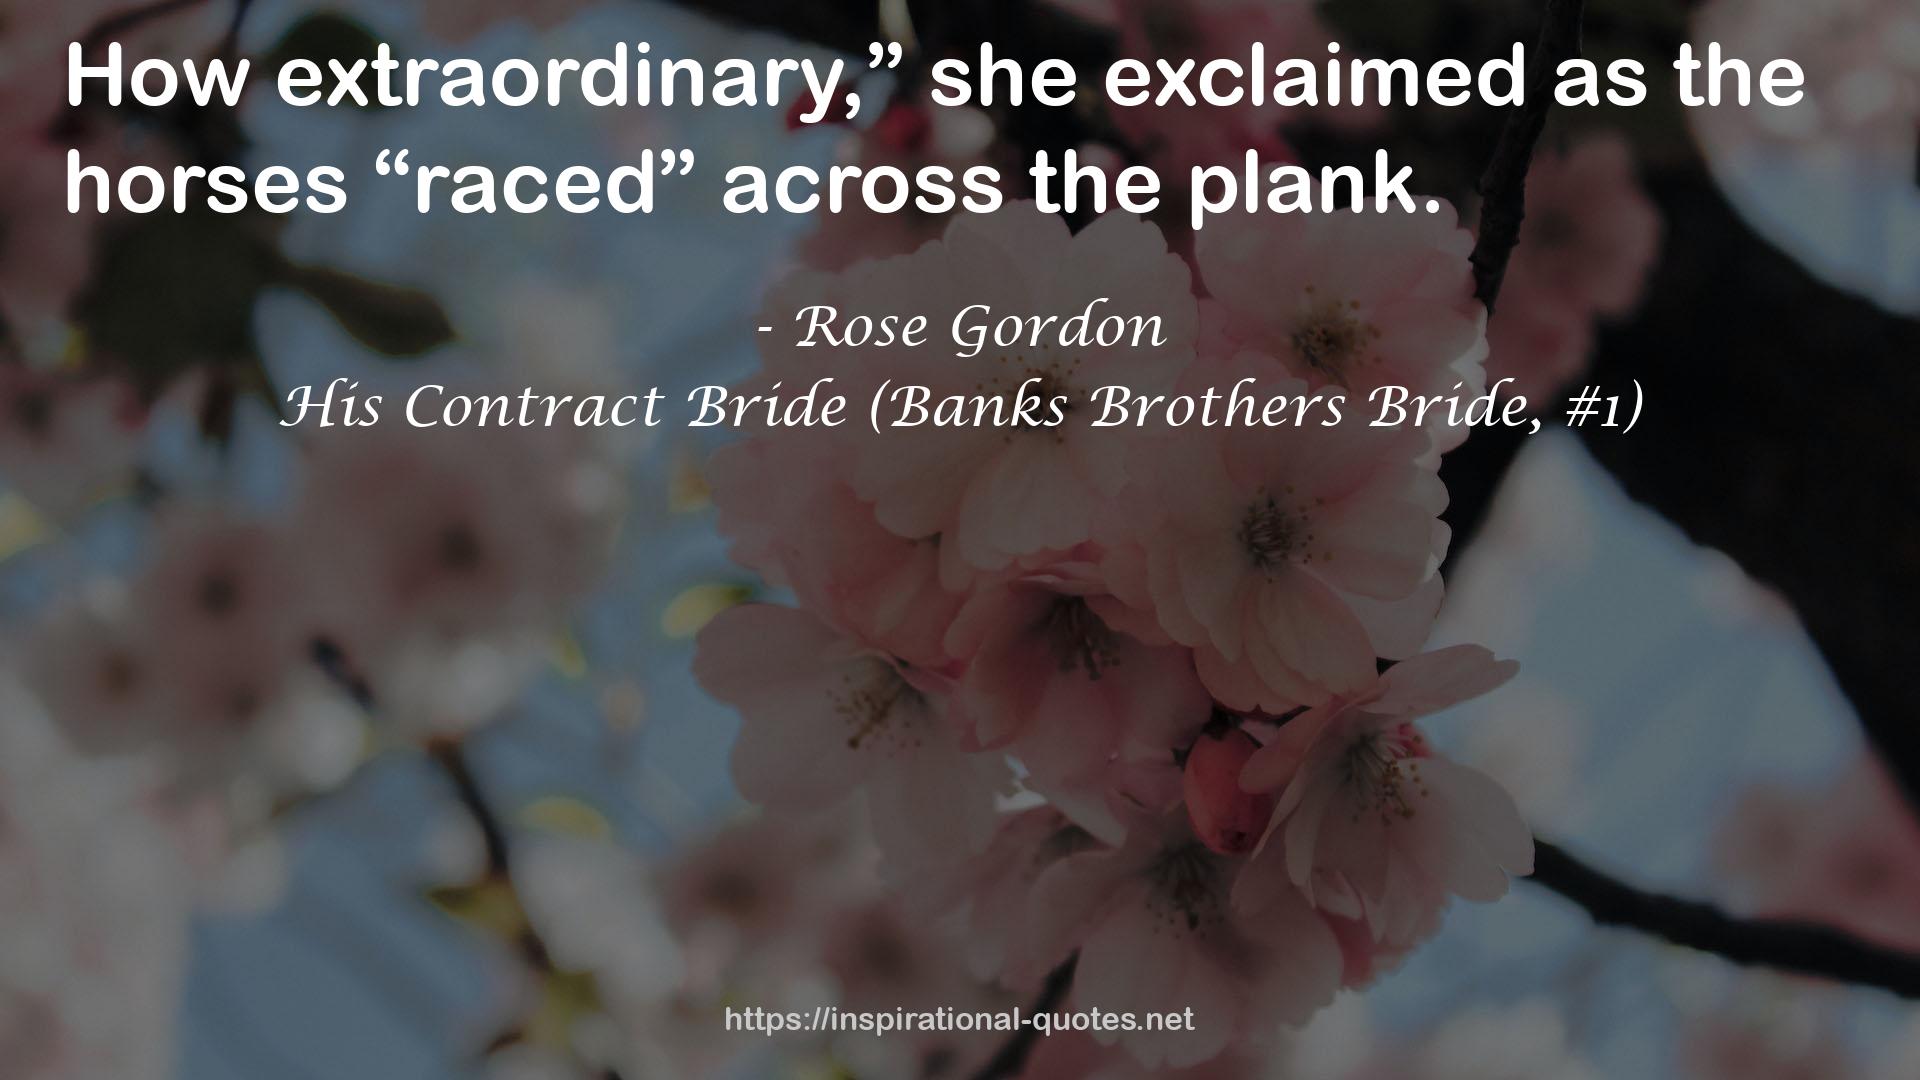 His Contract Bride (Banks Brothers Bride, #1) QUOTES